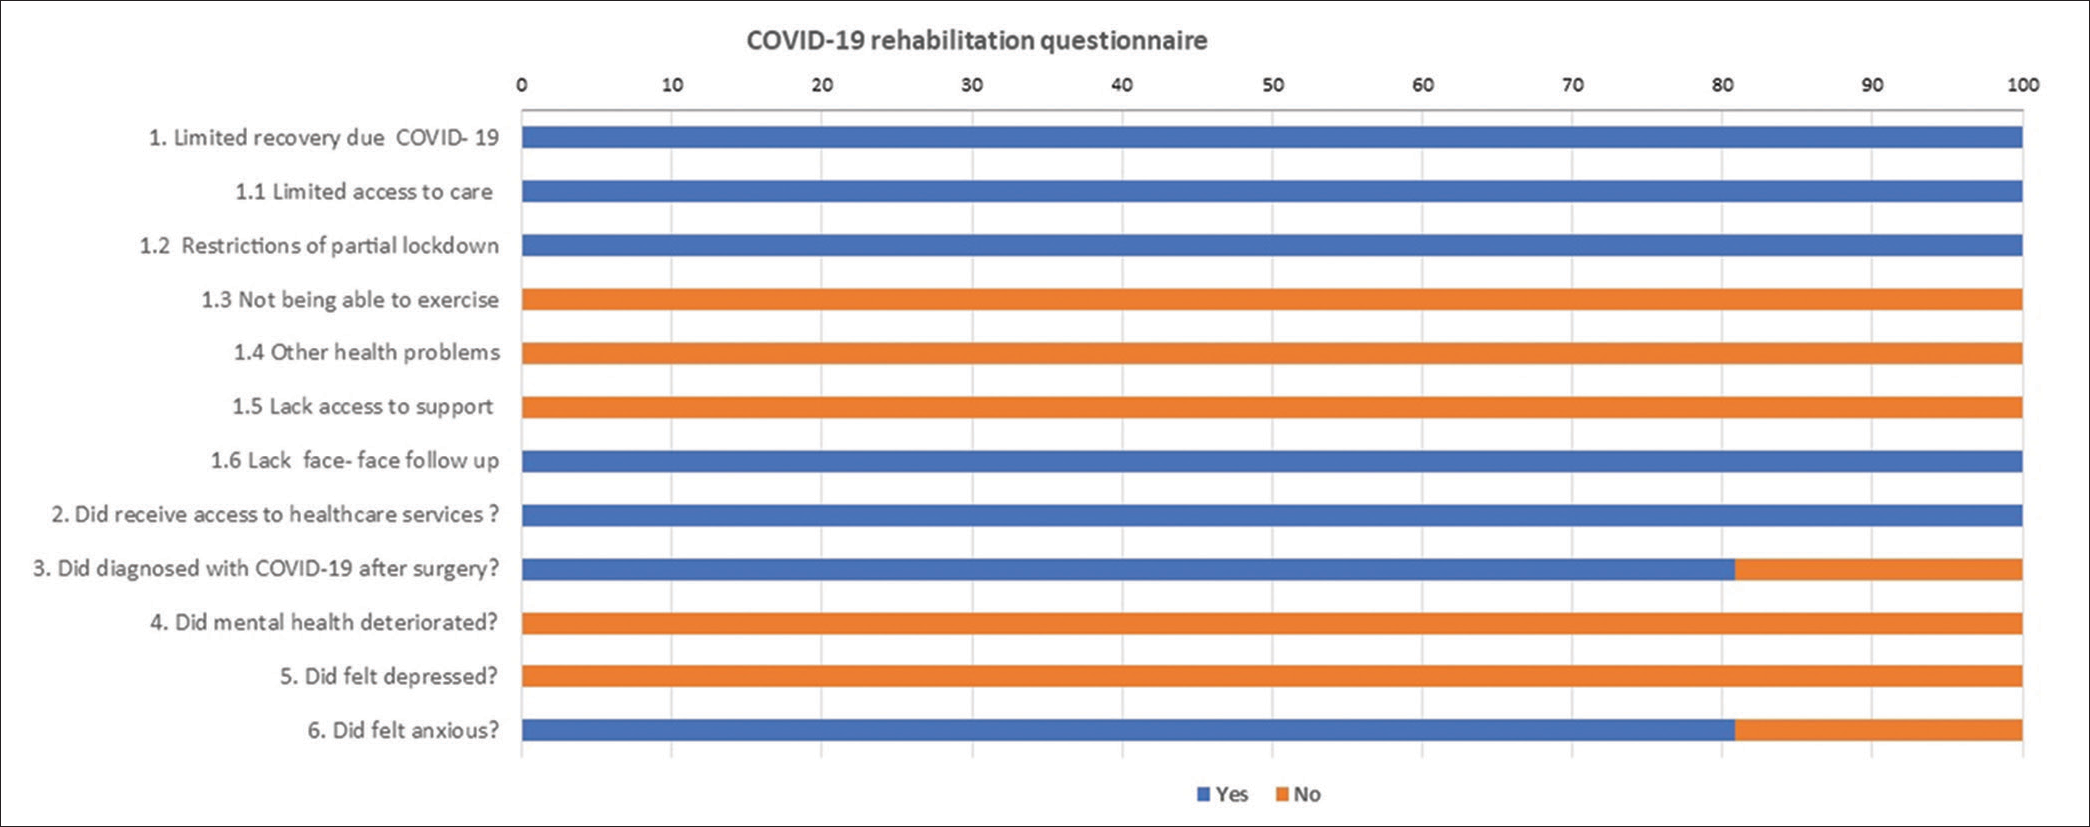 Responses of the study group patients for COVID-19 rehabilitation questionnaire.